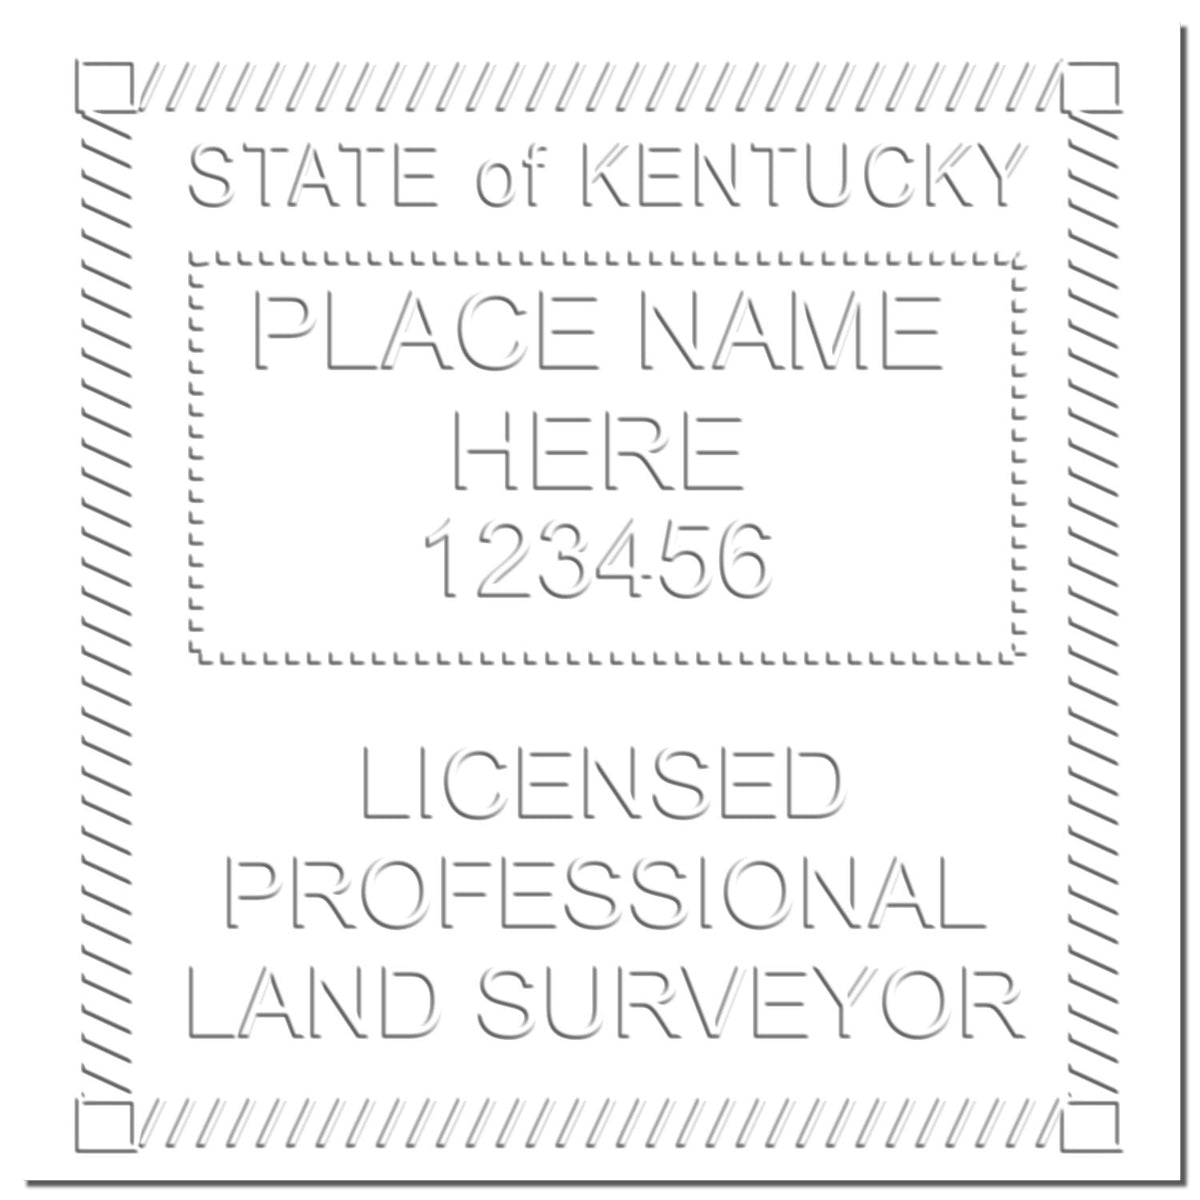 This paper is stamped with a sample imprint of the Kentucky Desk Surveyor Seal Embosser, signifying its quality and reliability.